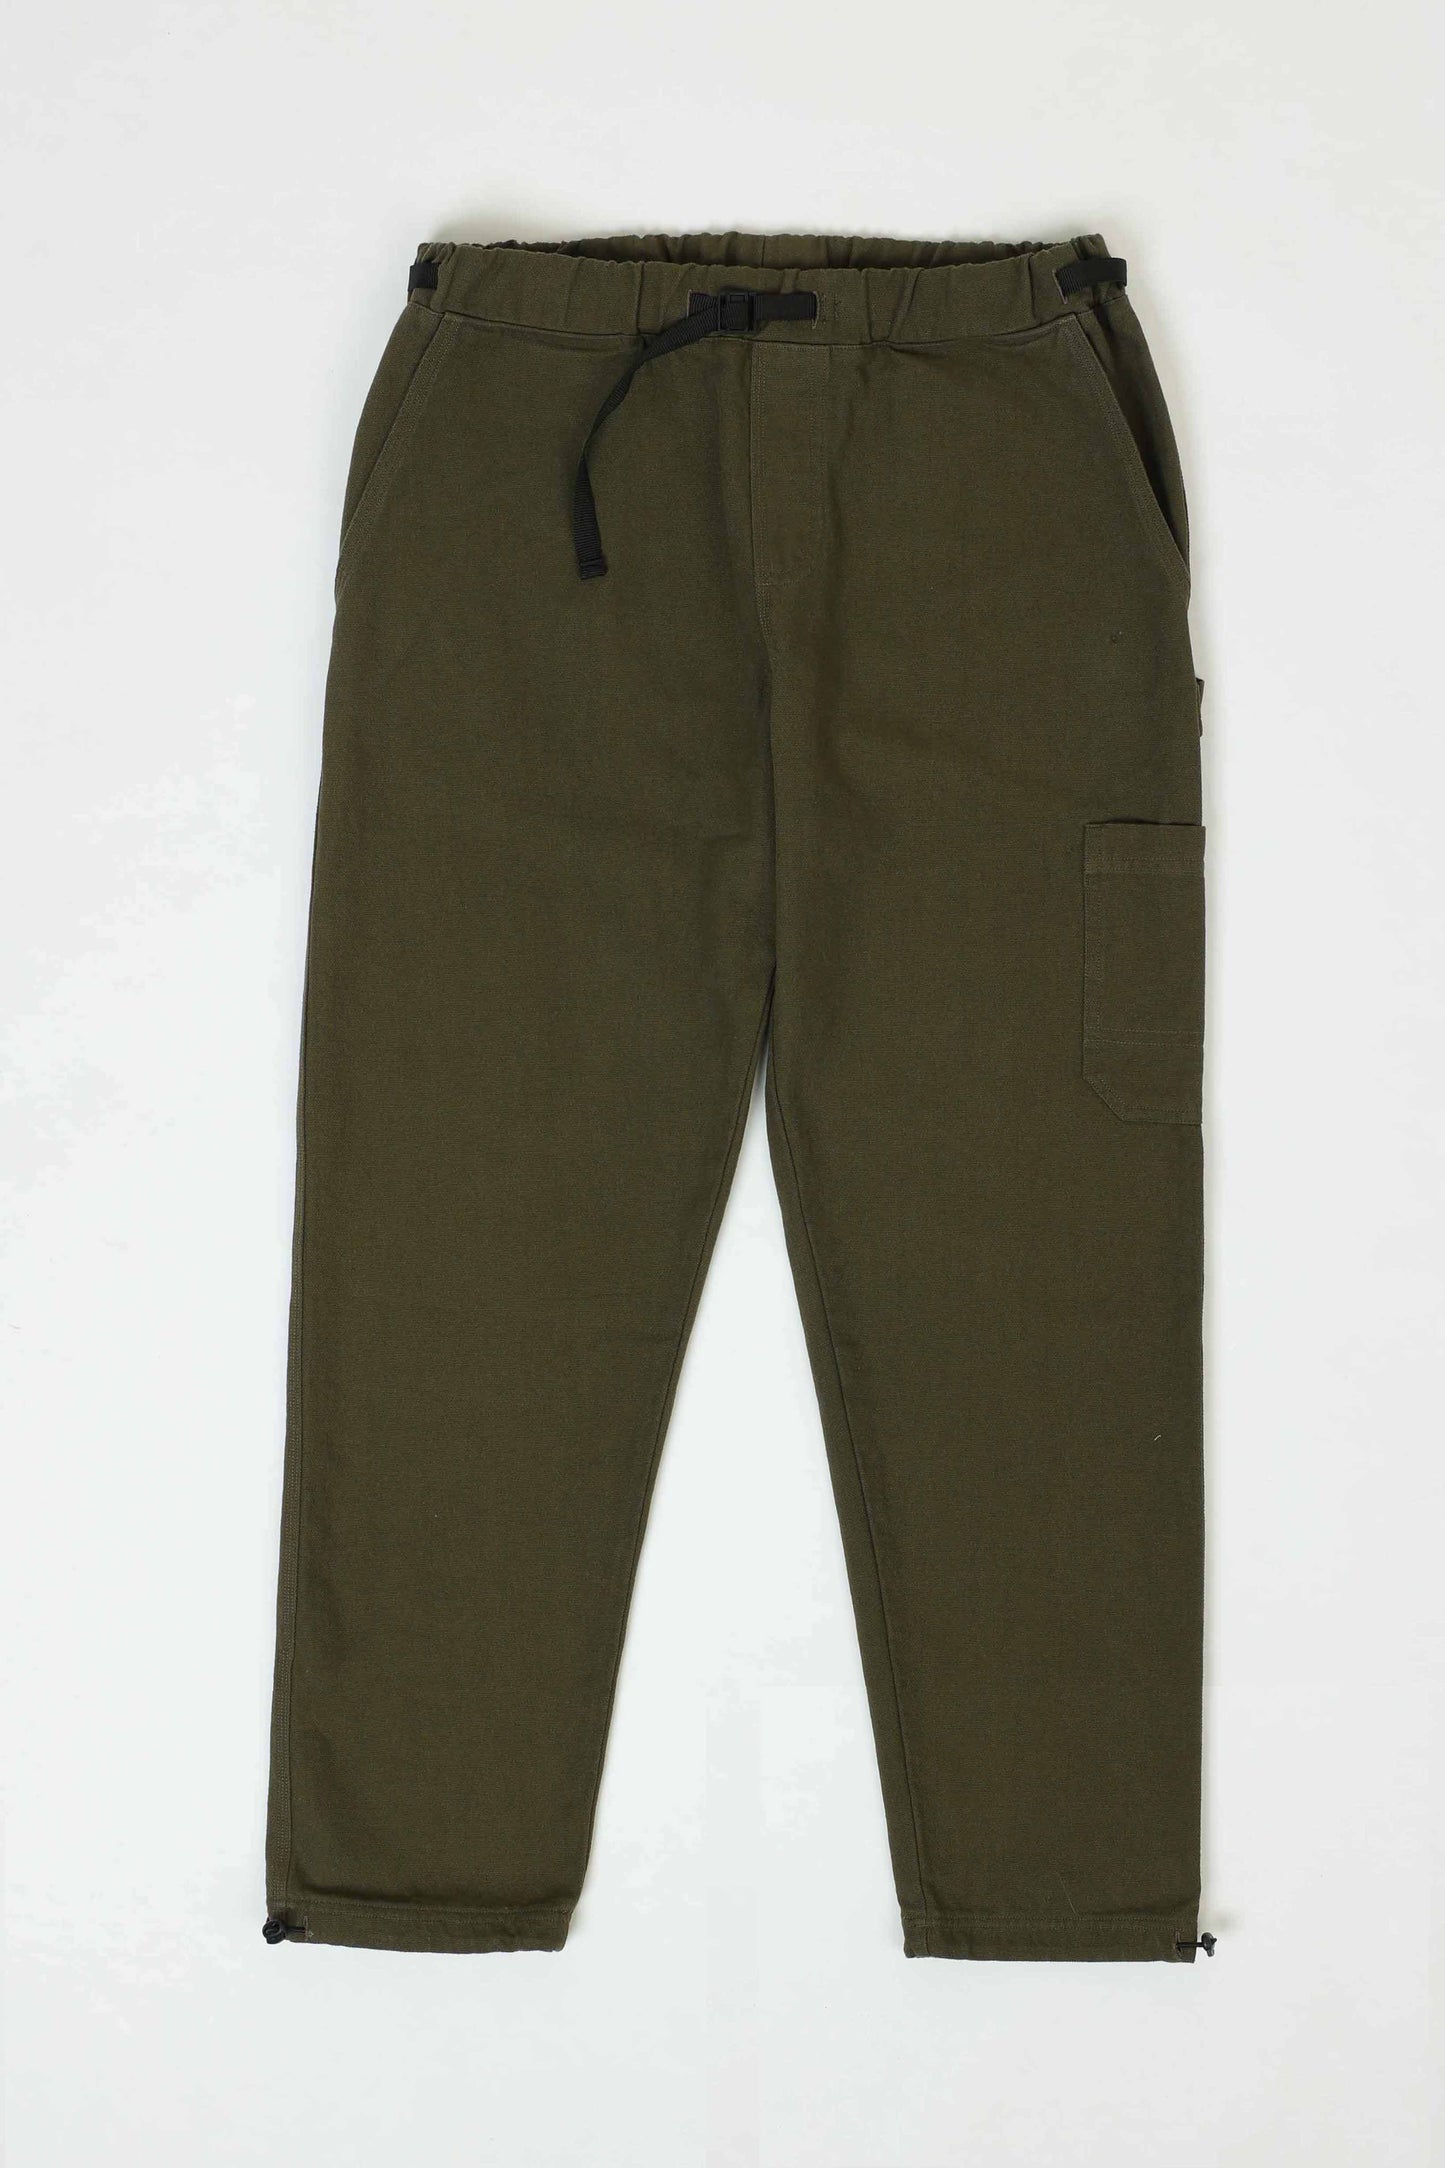 Workers Pant – Moss